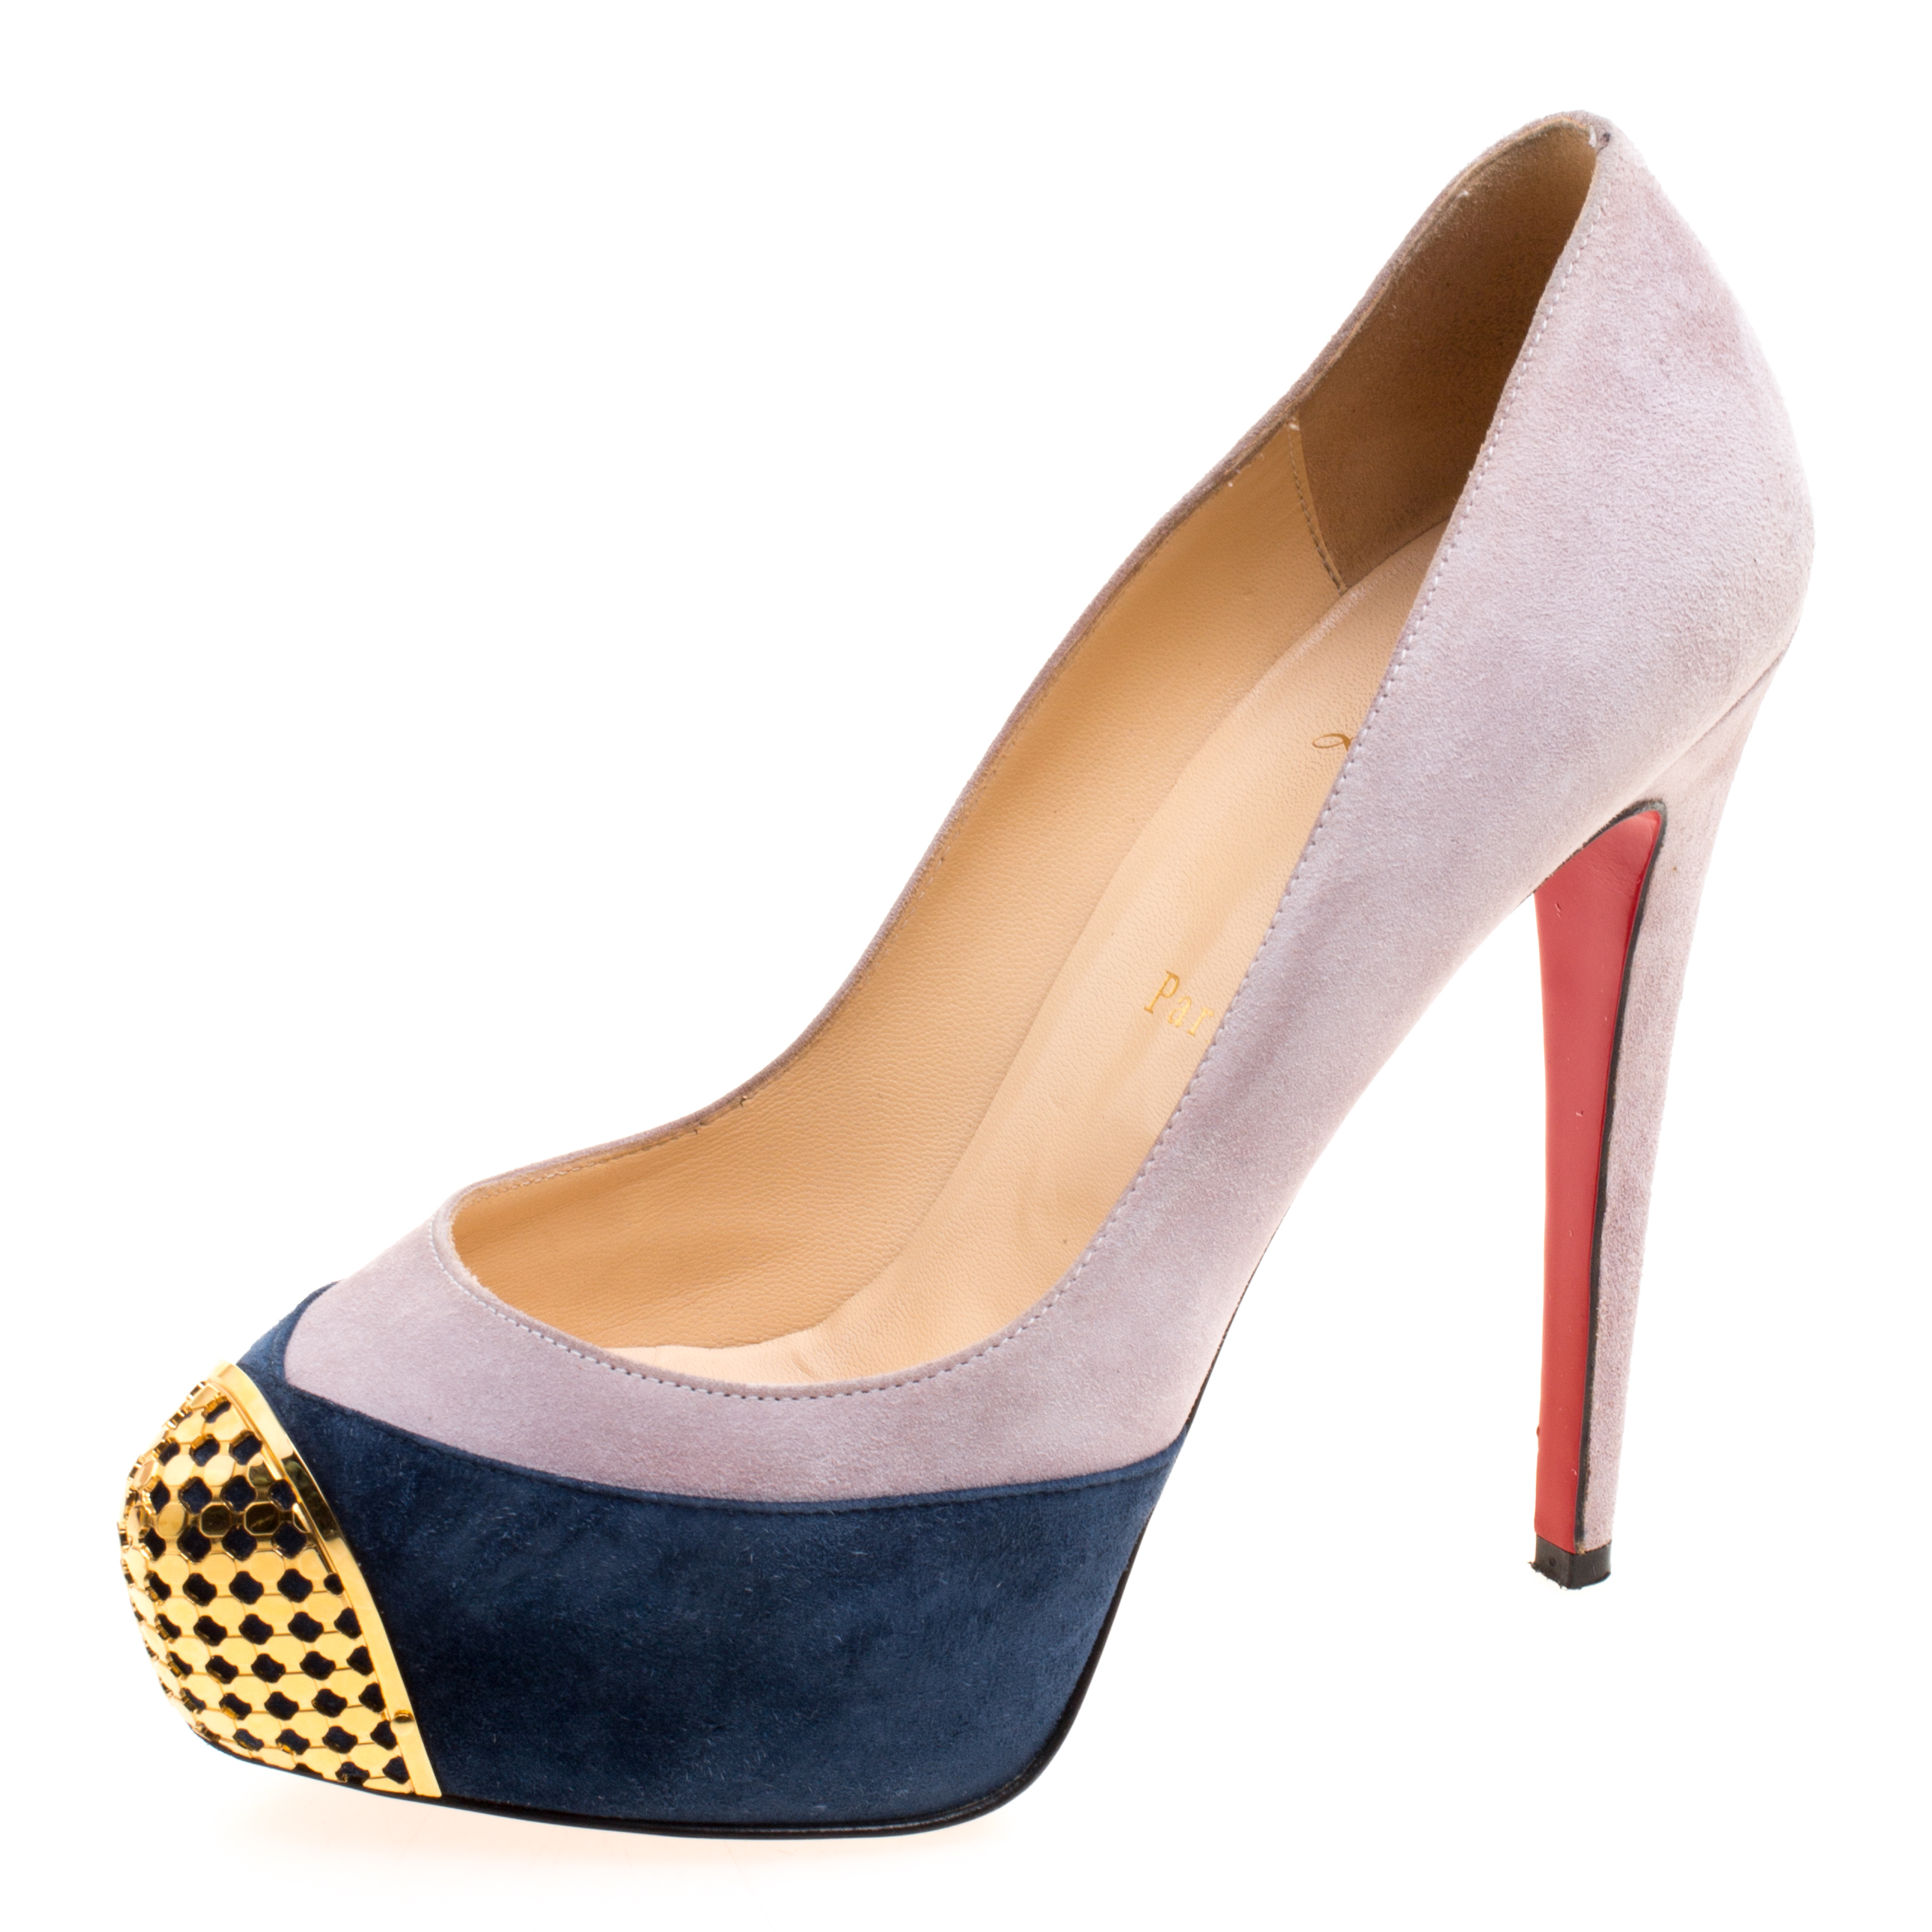 Christian Louboutin Two Tone Suede Maggie Embellished Cap Toe Platform Pumps Size 38.5